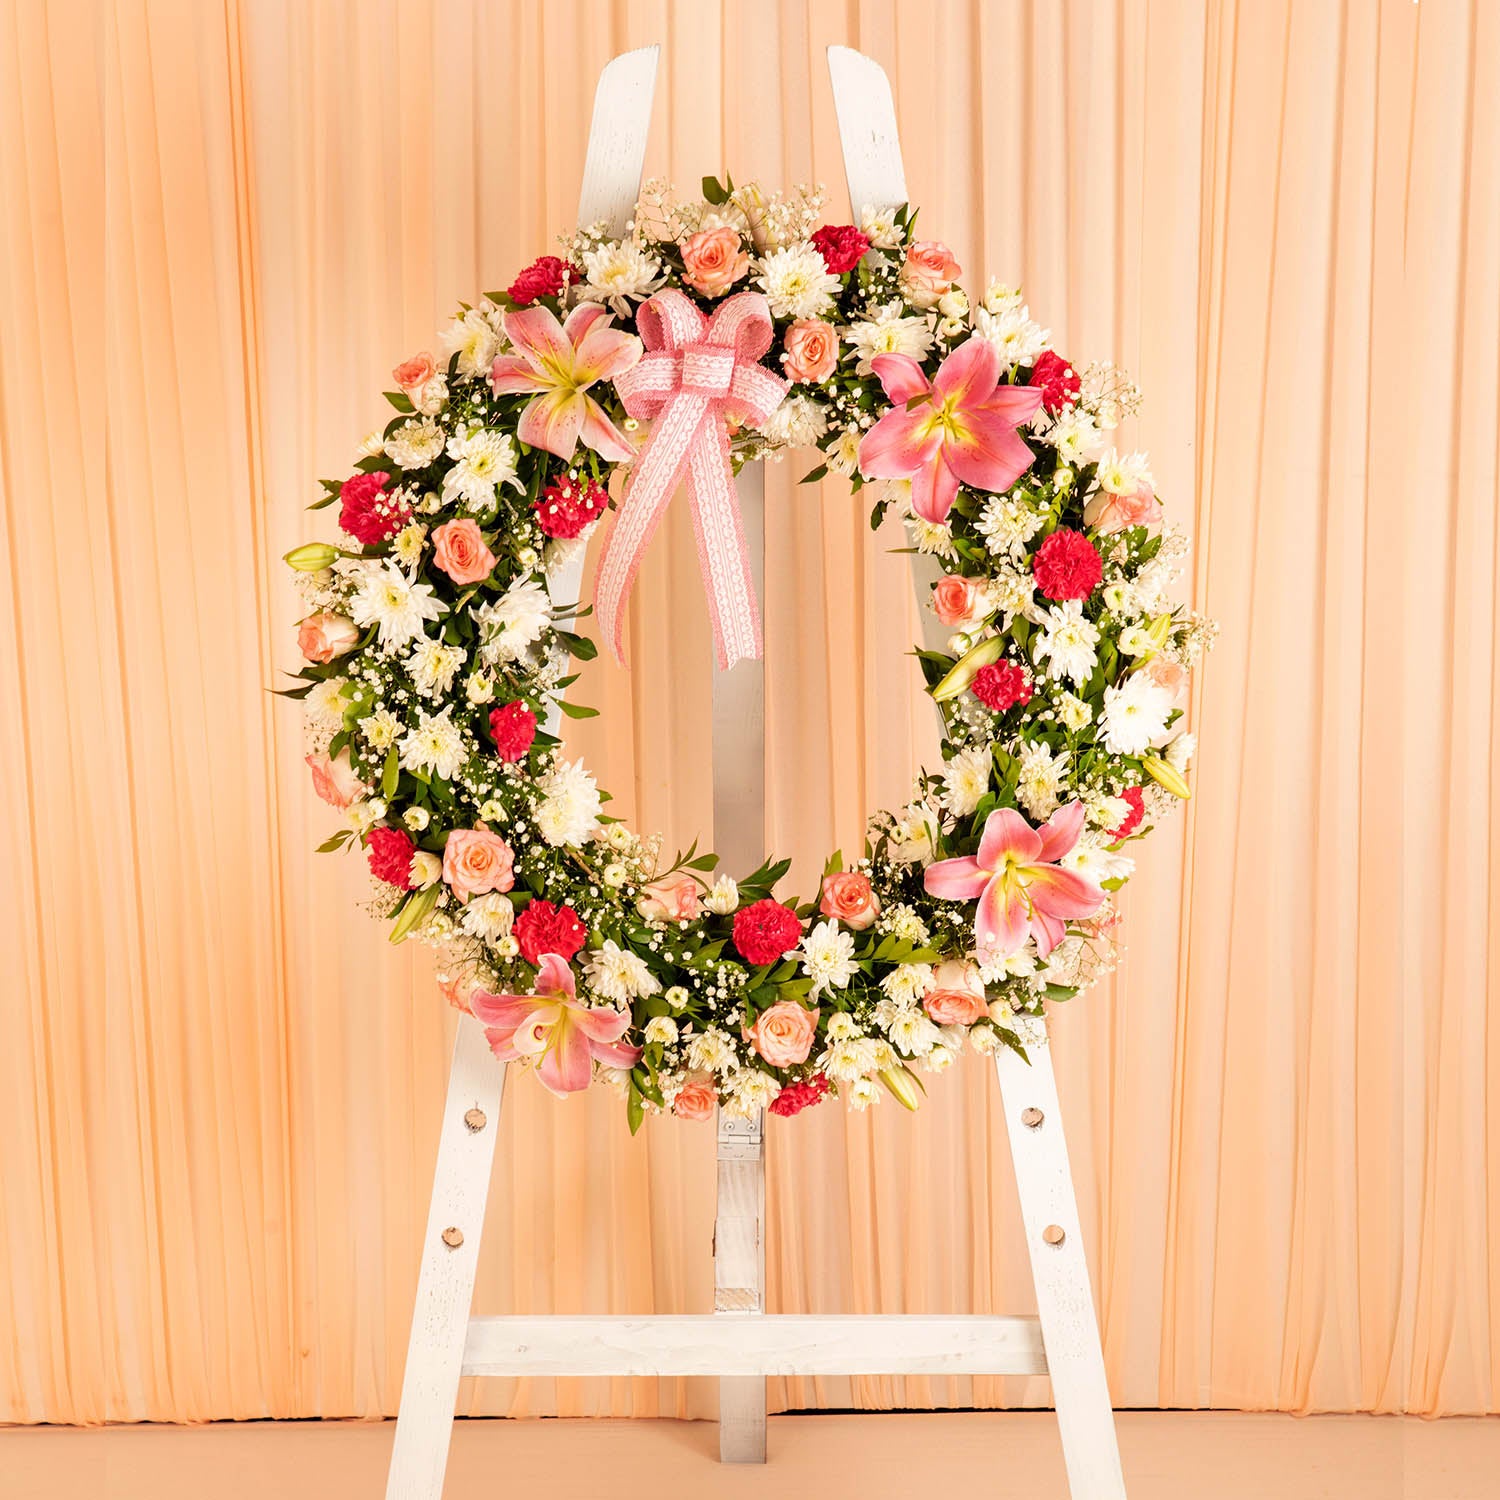 flower delivery in pune - flower wreath